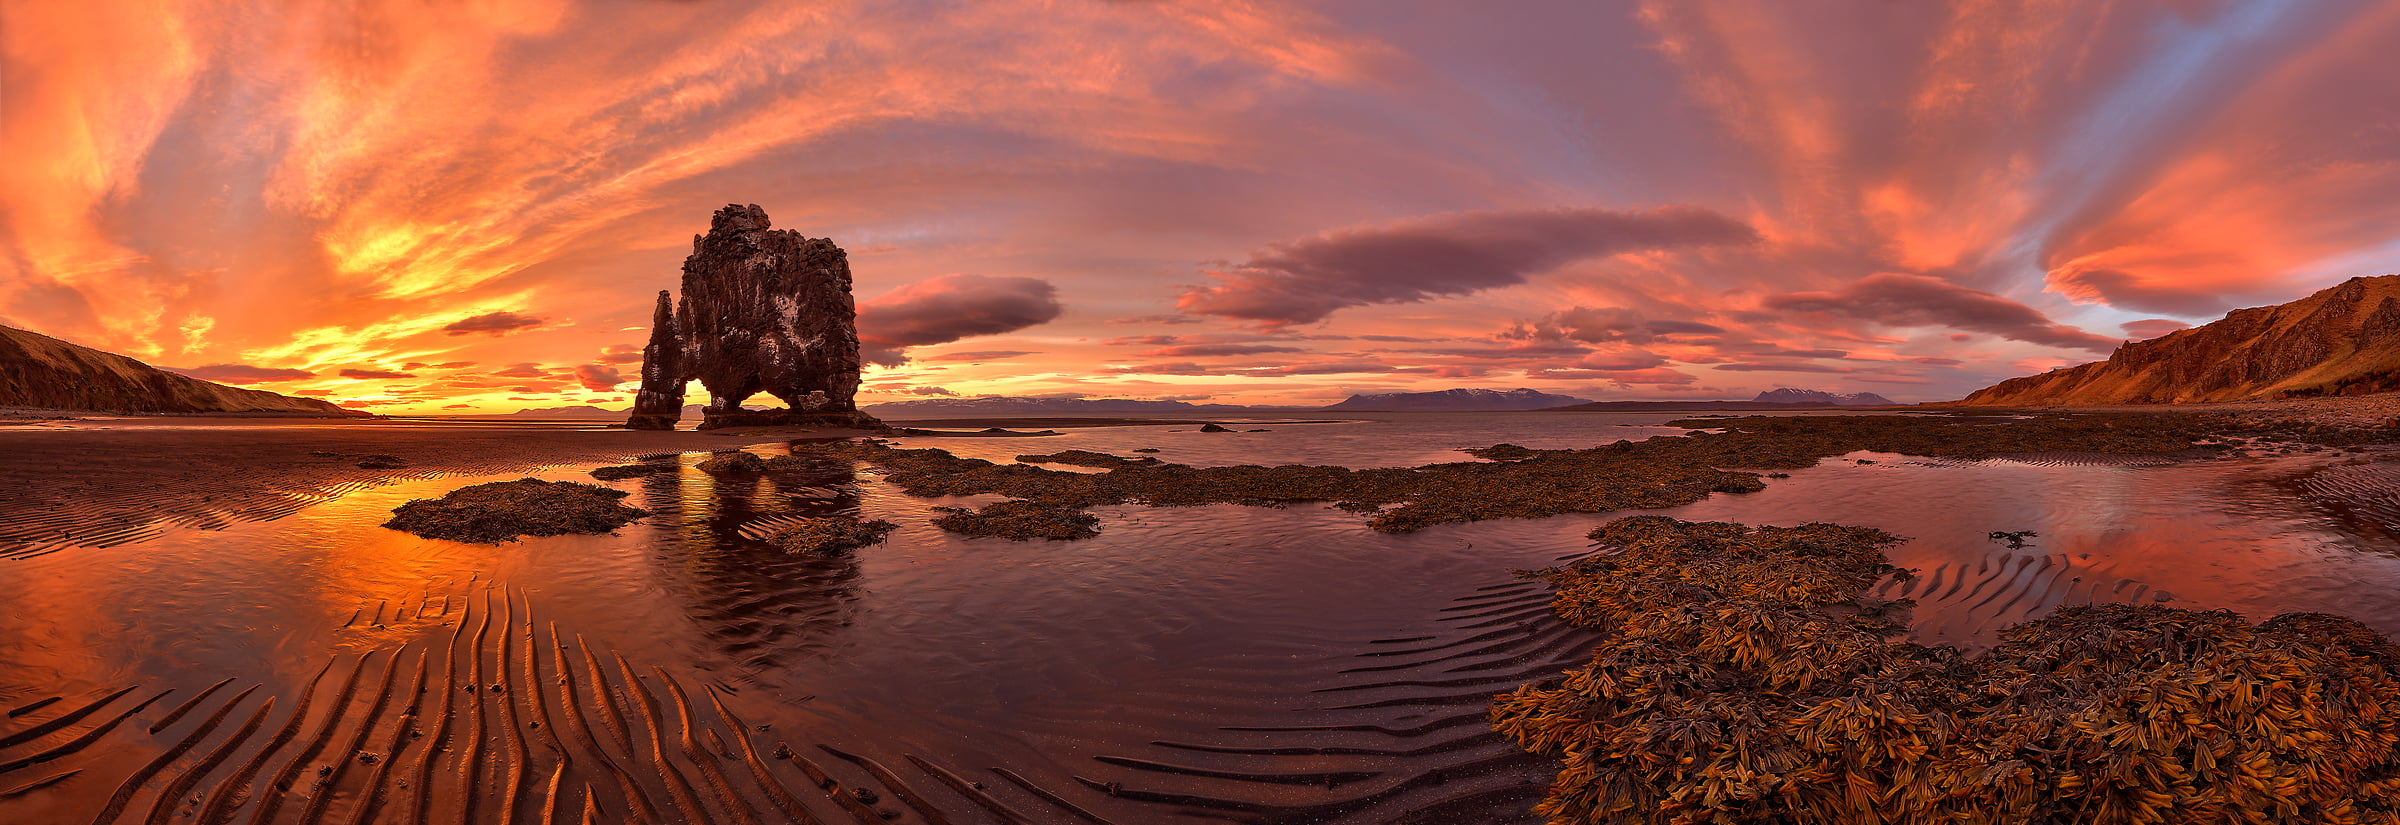 109 megapixels! A very high resolution, large-format VAST photo of sunset and sunrise on the water with a giant rock structure called Hvítserkur Monolith or Dinosaur Rock; fine art landscape photo created by Scott Dimond in the Northwestern Region of Iceland.